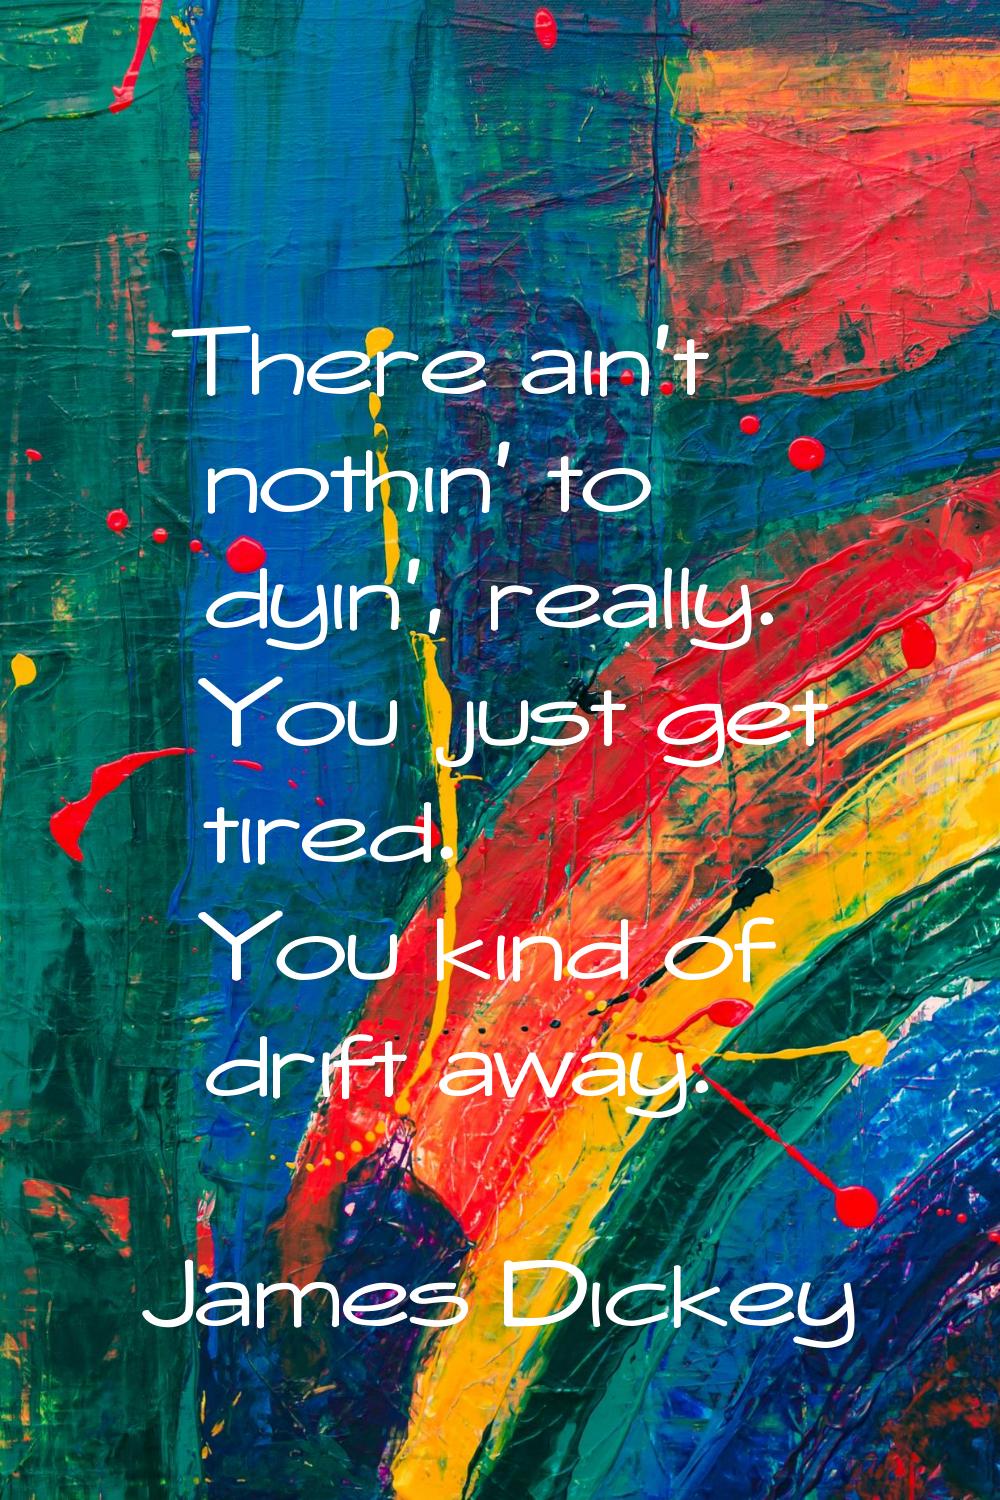 There ain't nothin' to dyin', really. You just get tired. You kind of drift away.